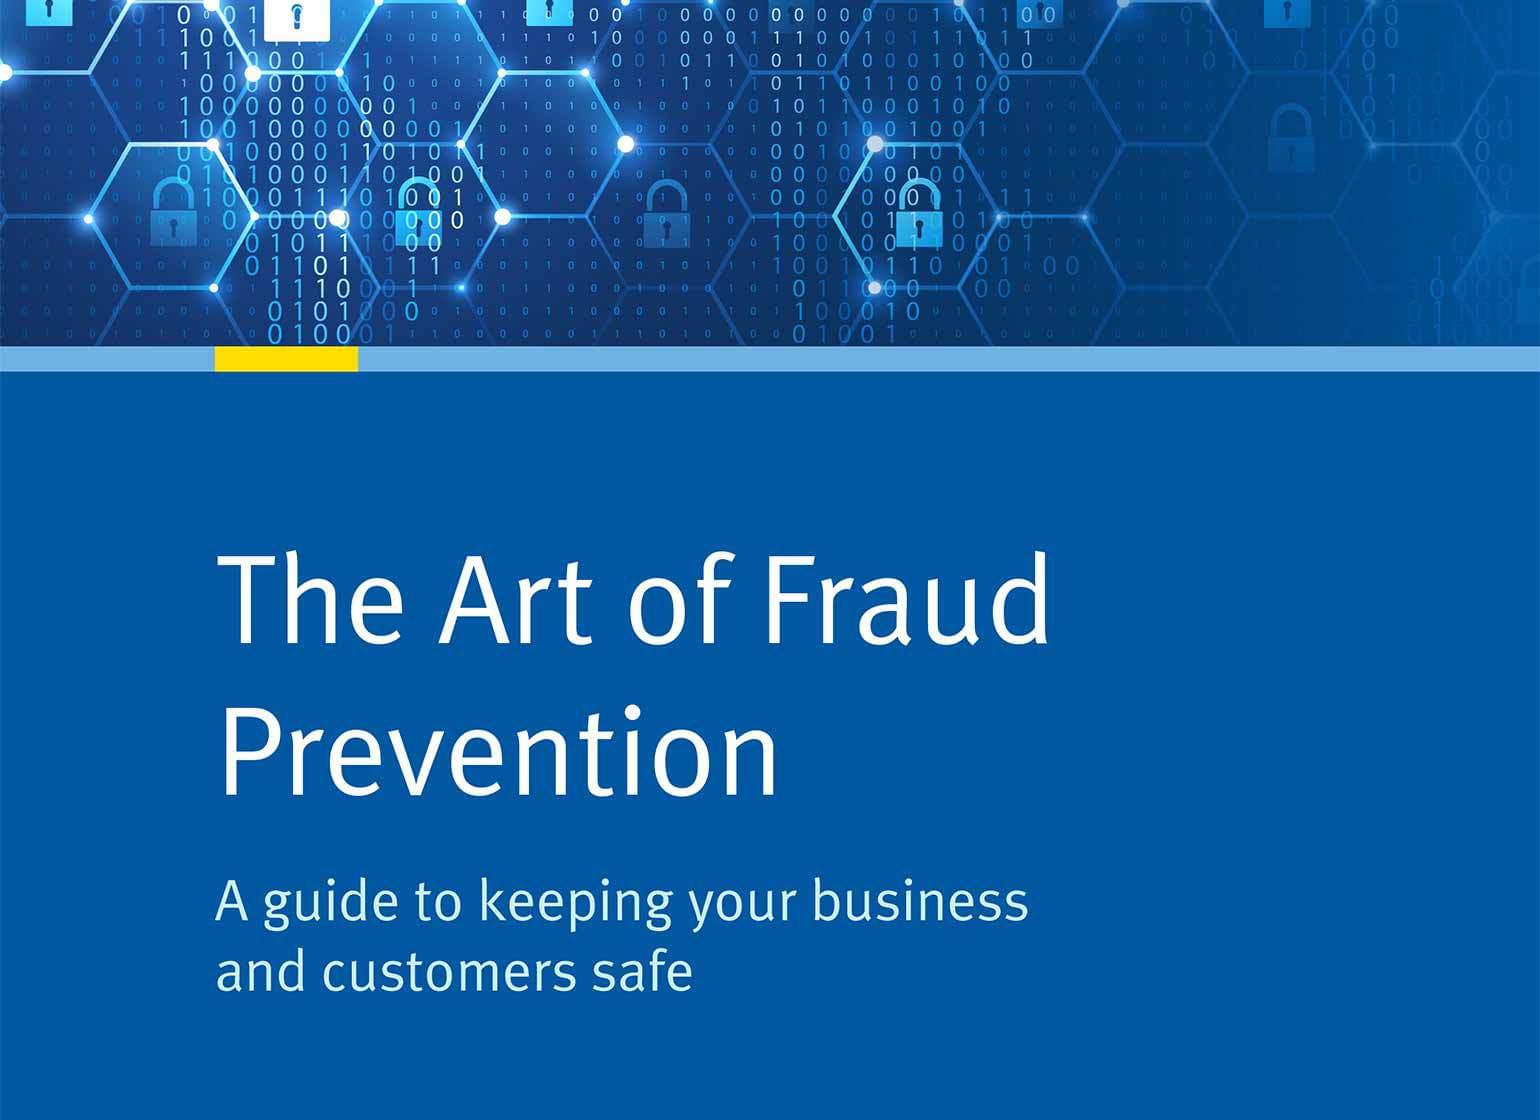 The Art of Fraud Prevention: A guide to keeping your business and customers safe